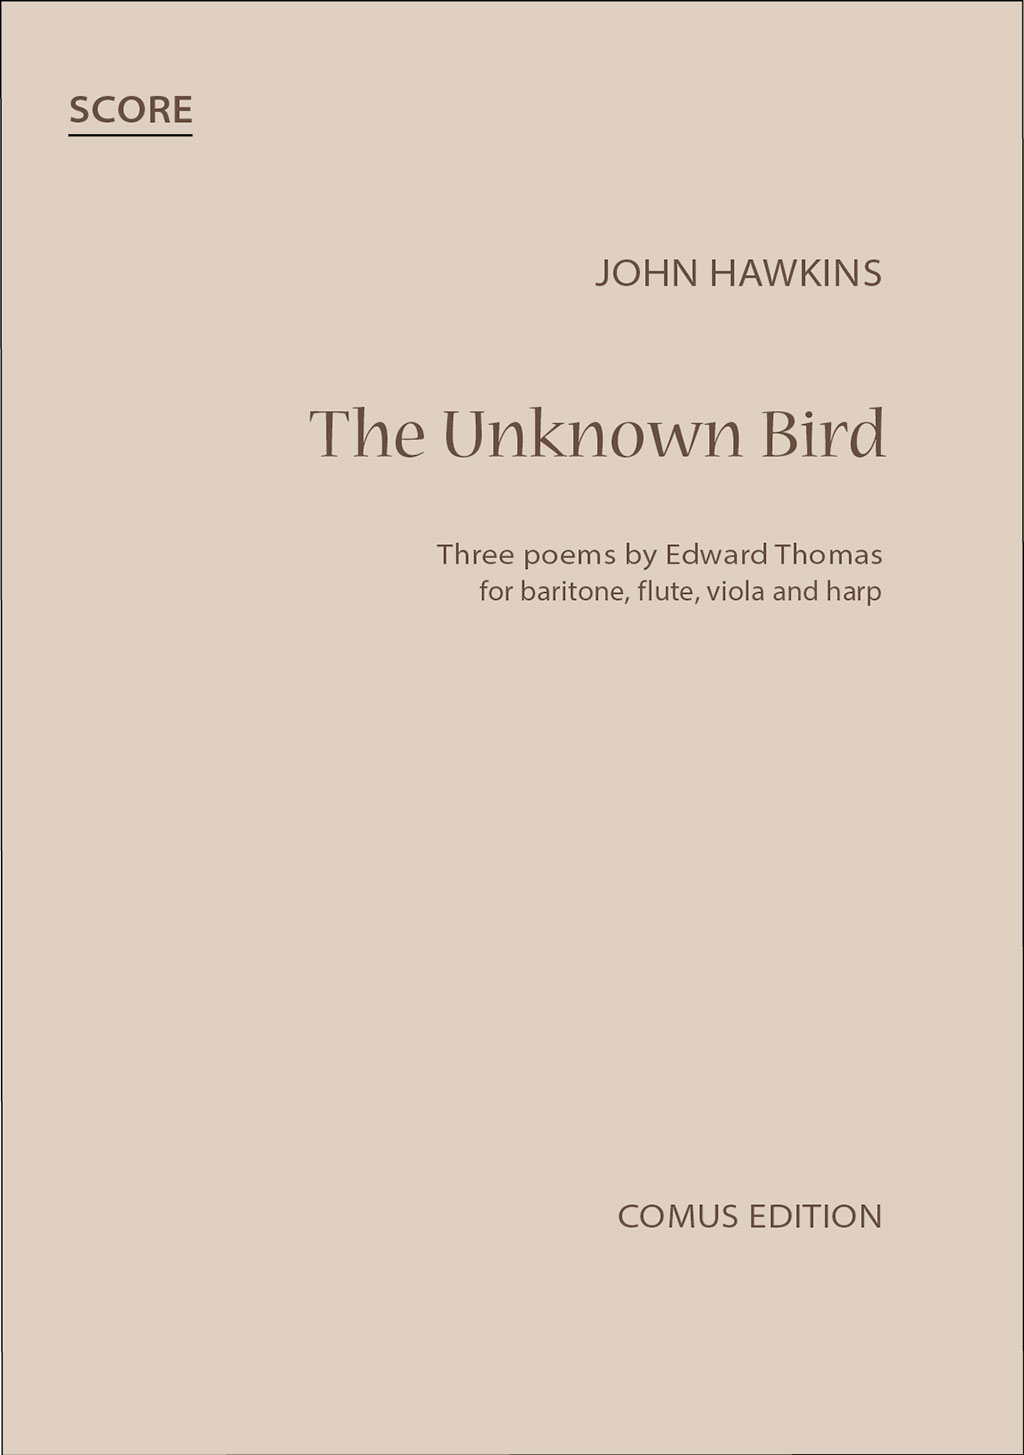 Outer cover of item The Unknown Bird